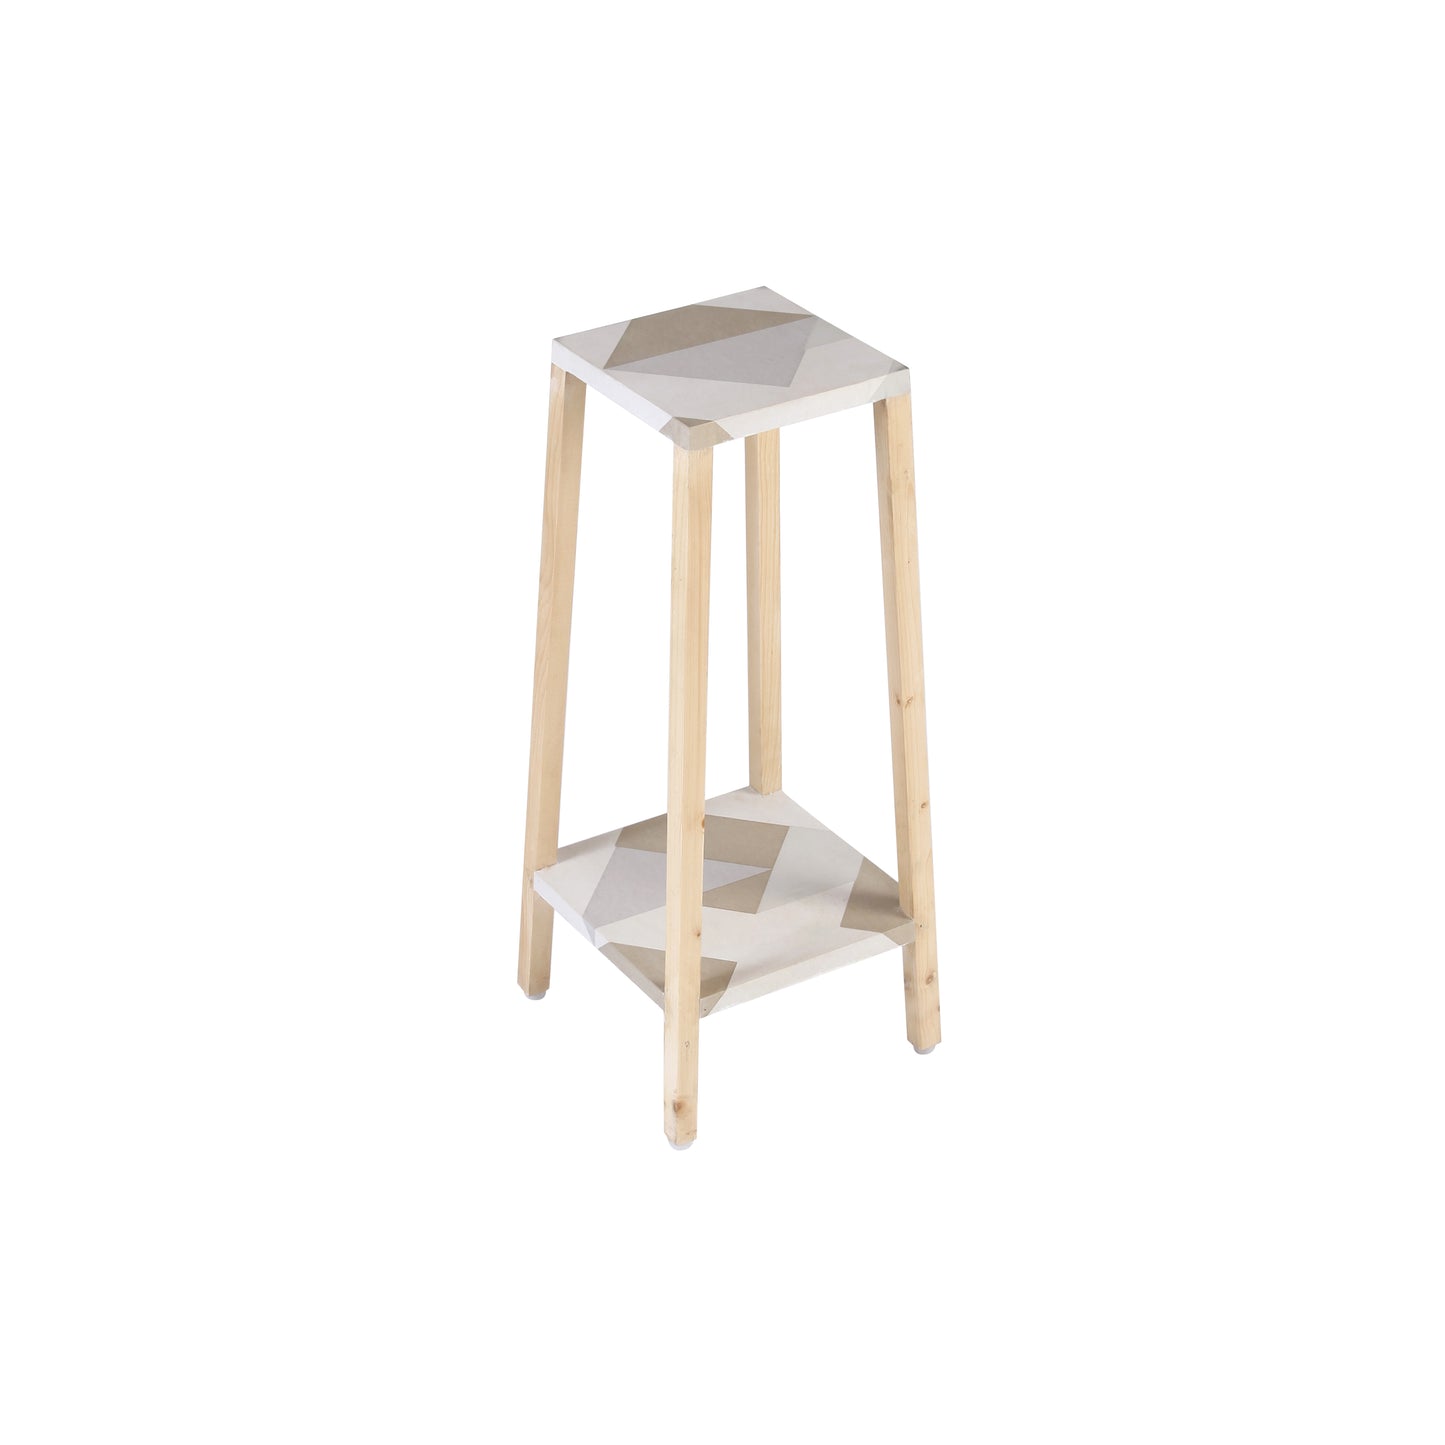 A Tiny Mistake Square Four Legged Tapering Two Tier Decorative Stand Two Tiers) (Geometric Base with Light Legs)